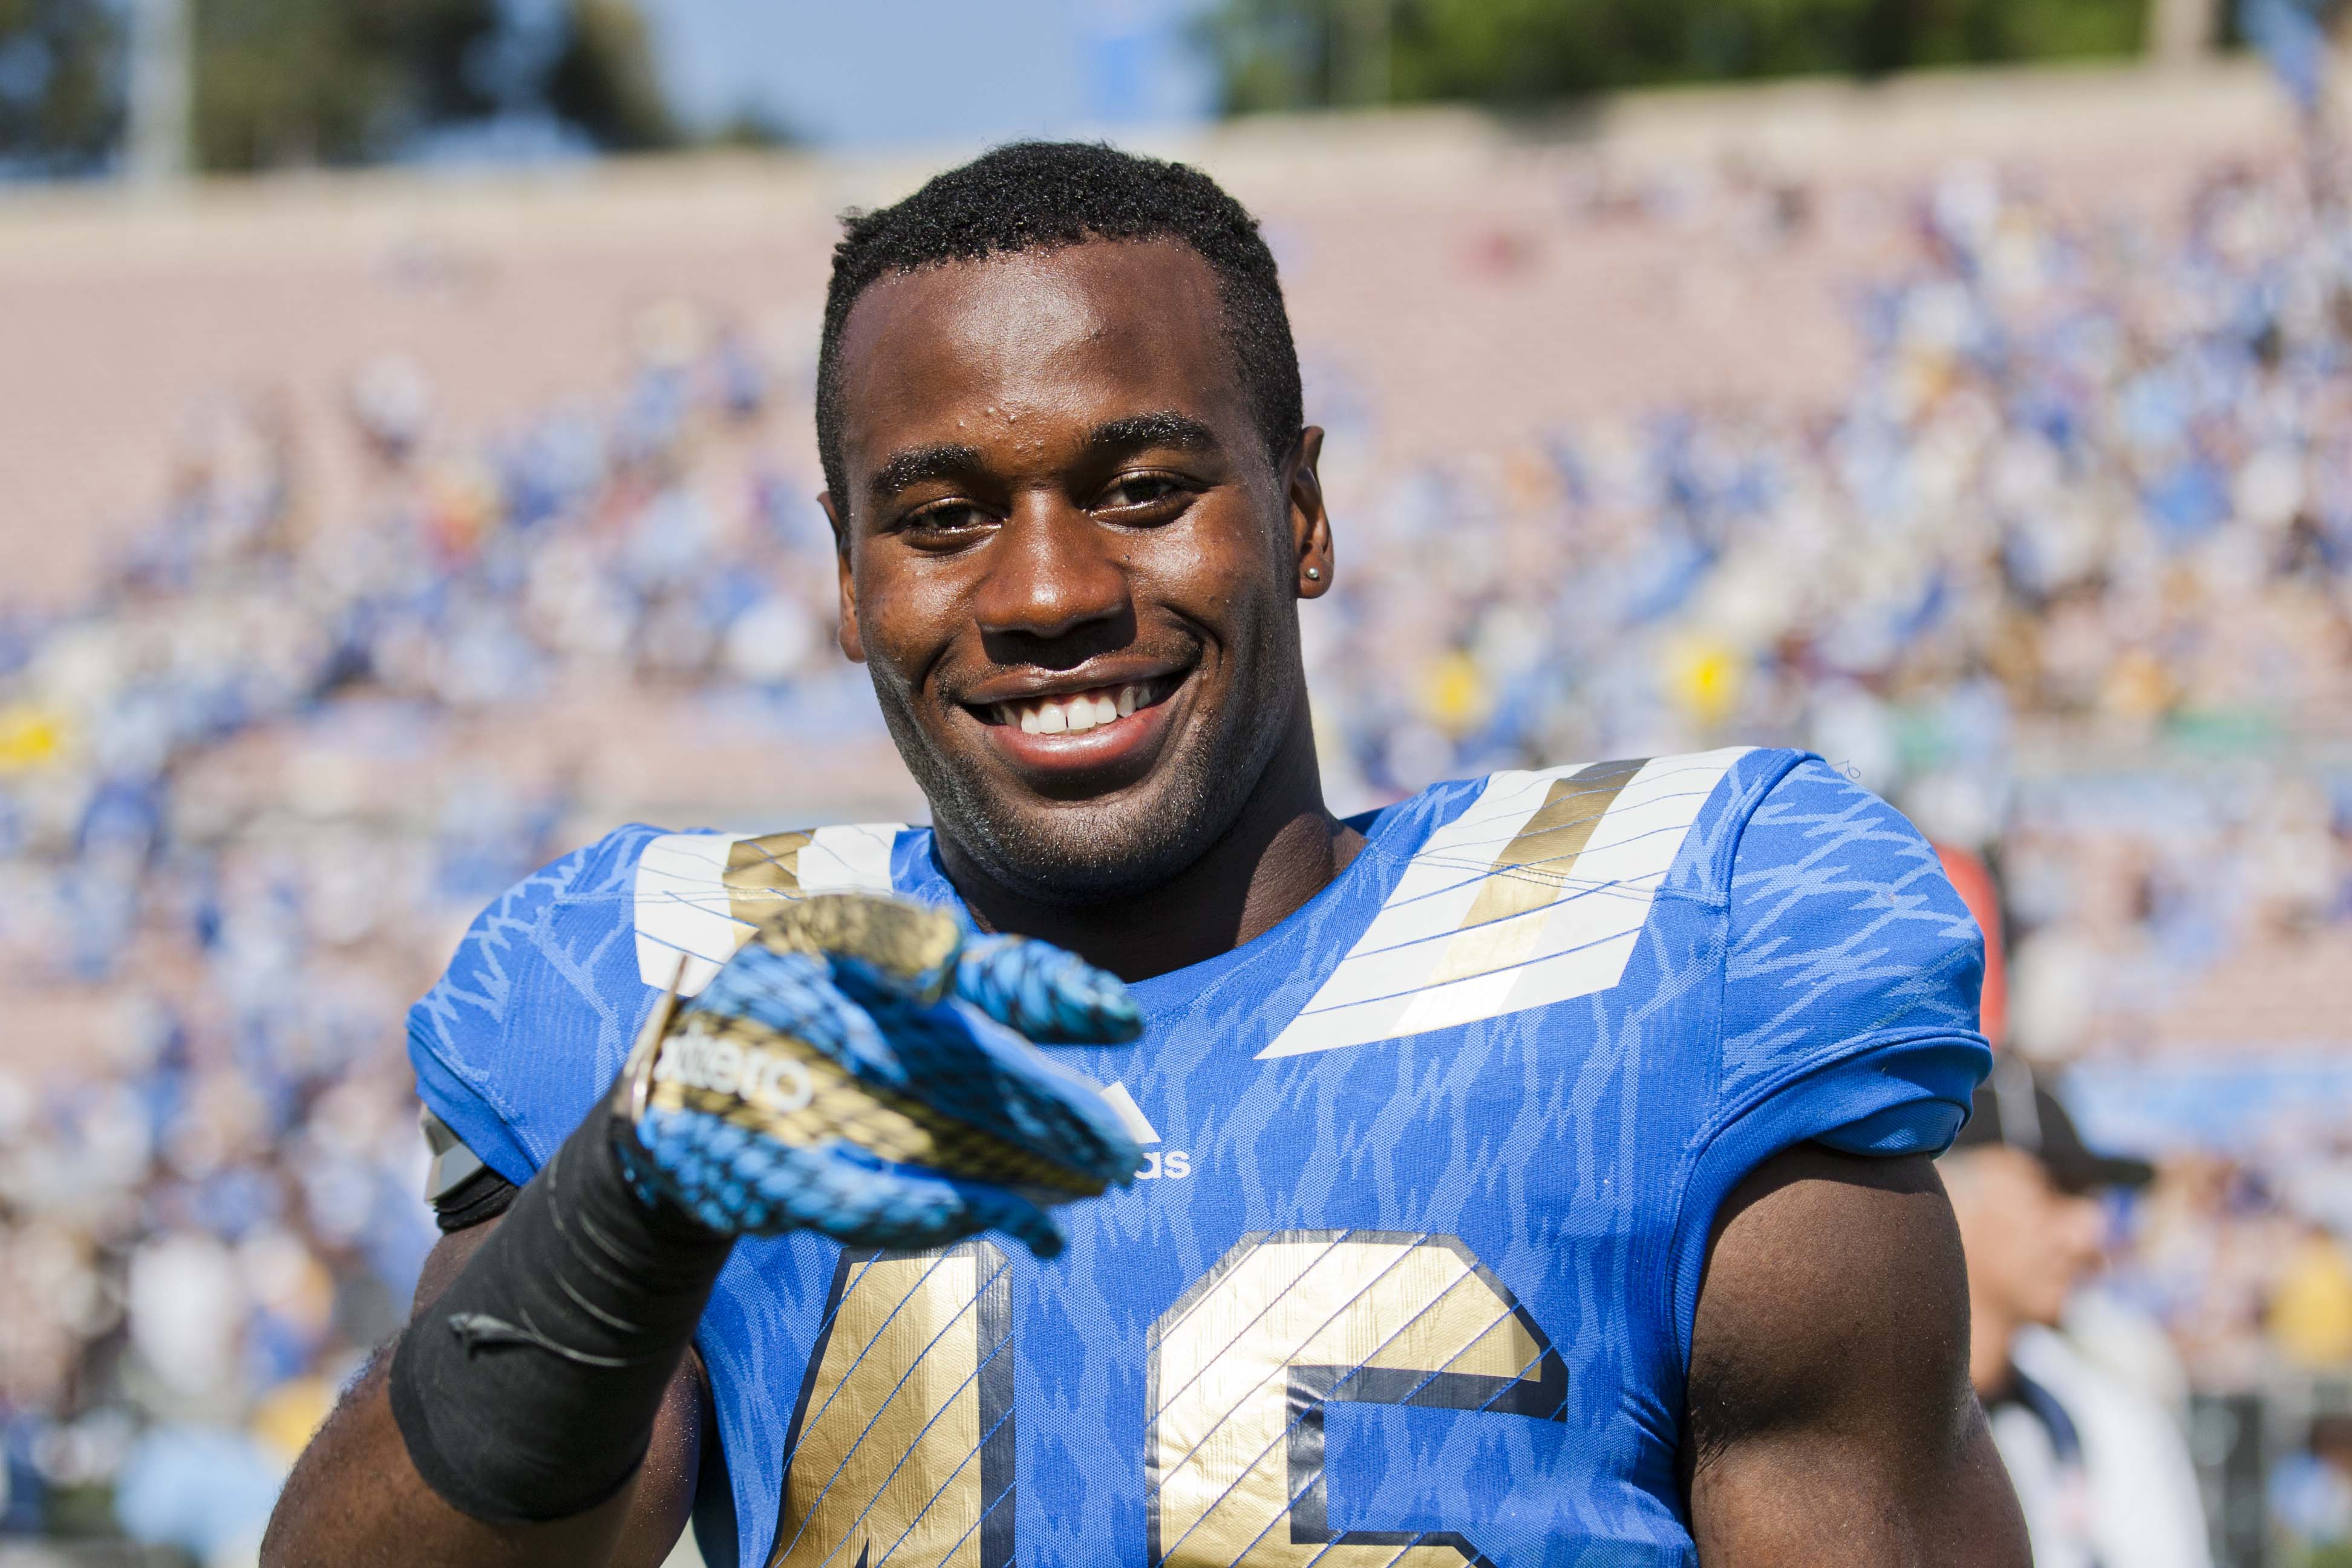 UCLA linebacker Kene Orjioke is set to make his final appearance as a Bruin, forgoing his final year of eligibility. (Katie Meyers/UCLA Athletics)